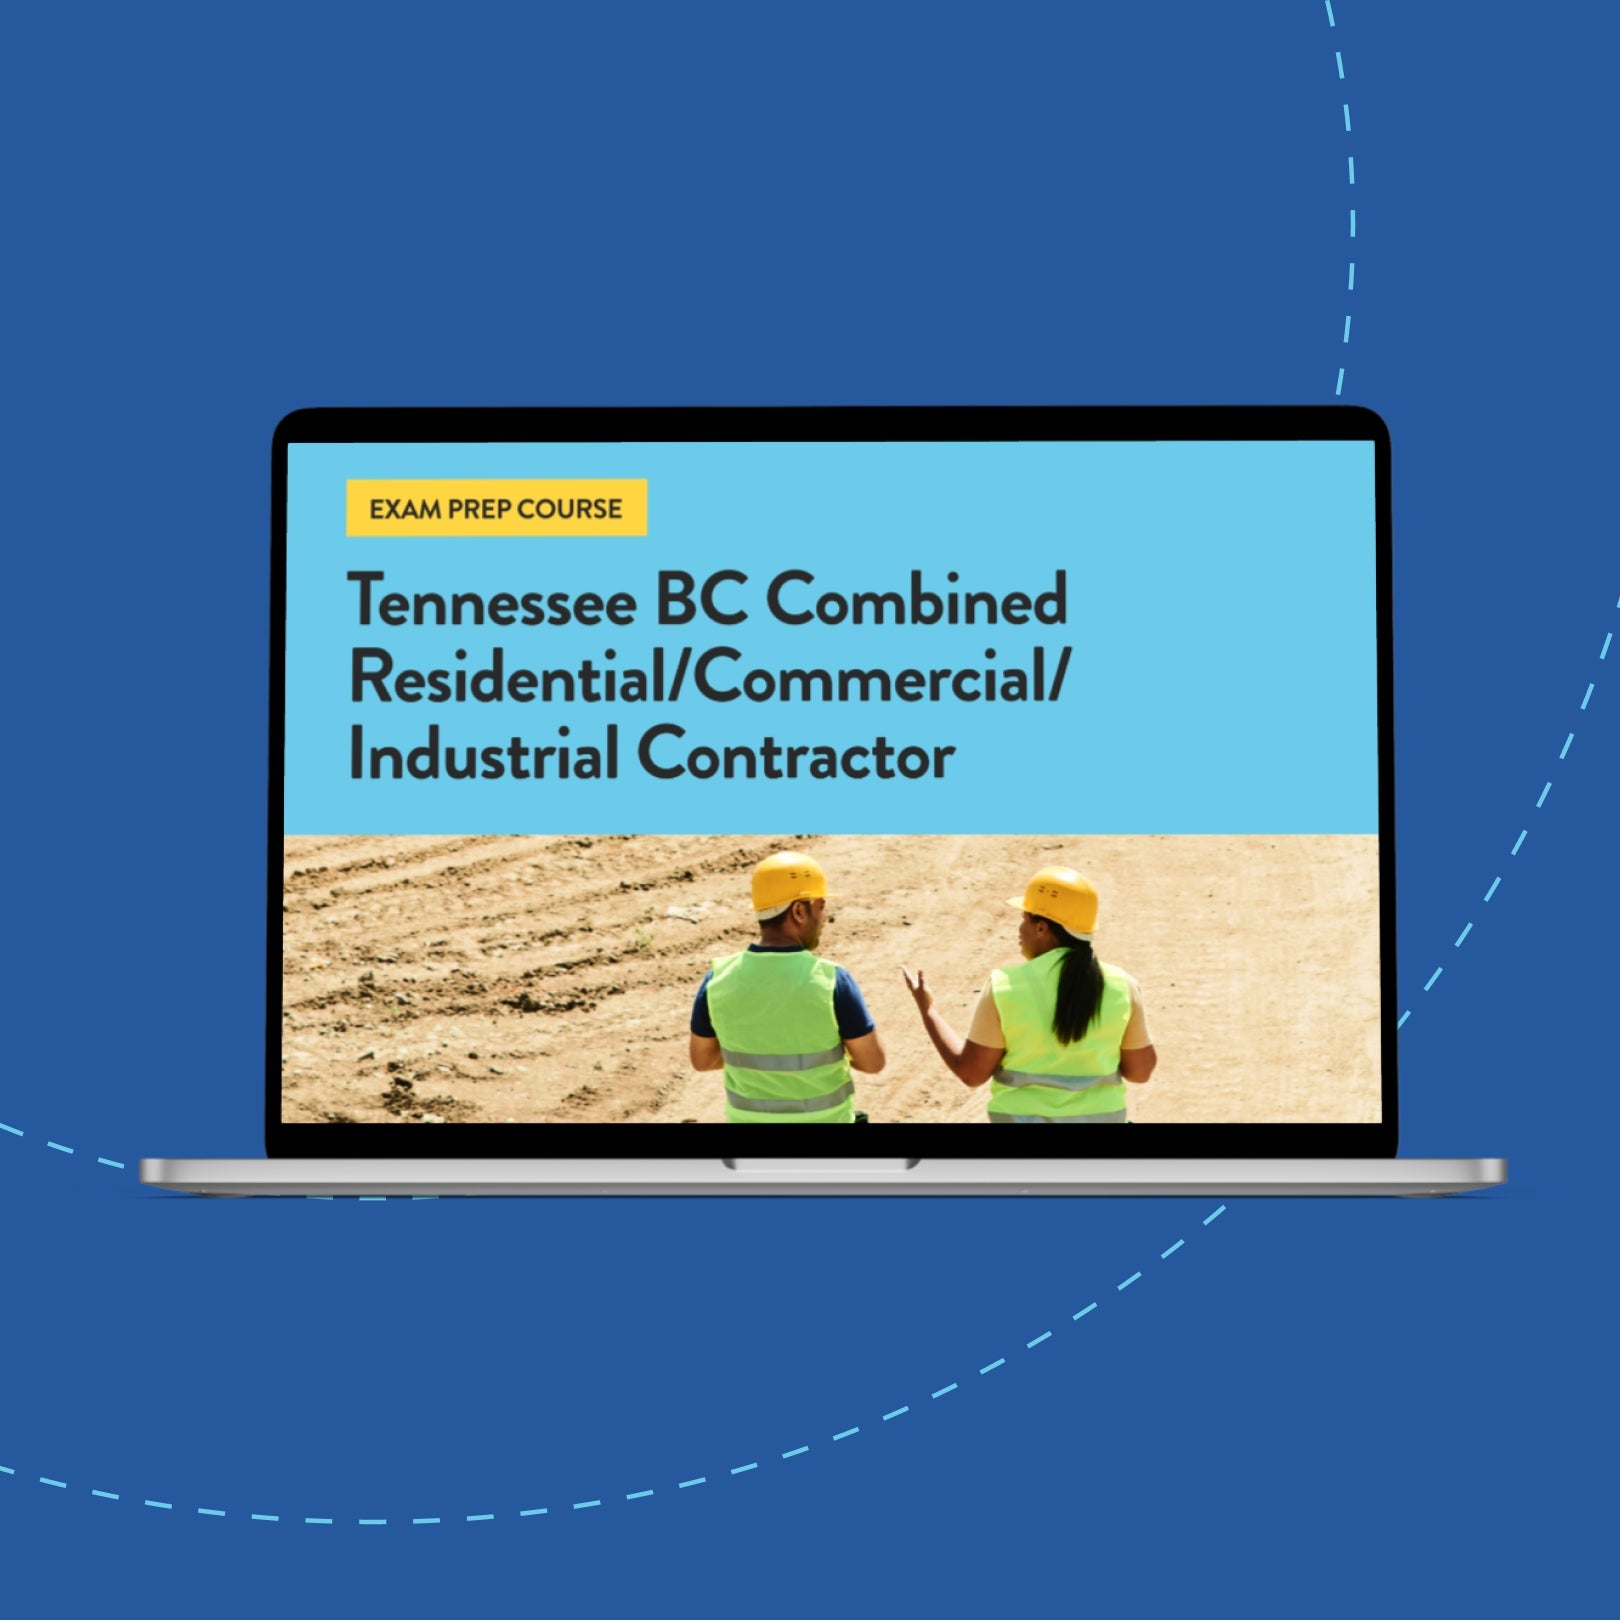 Tennessee BC Combined Residential/Commercial/Industrial Contractor Exam Prep Course